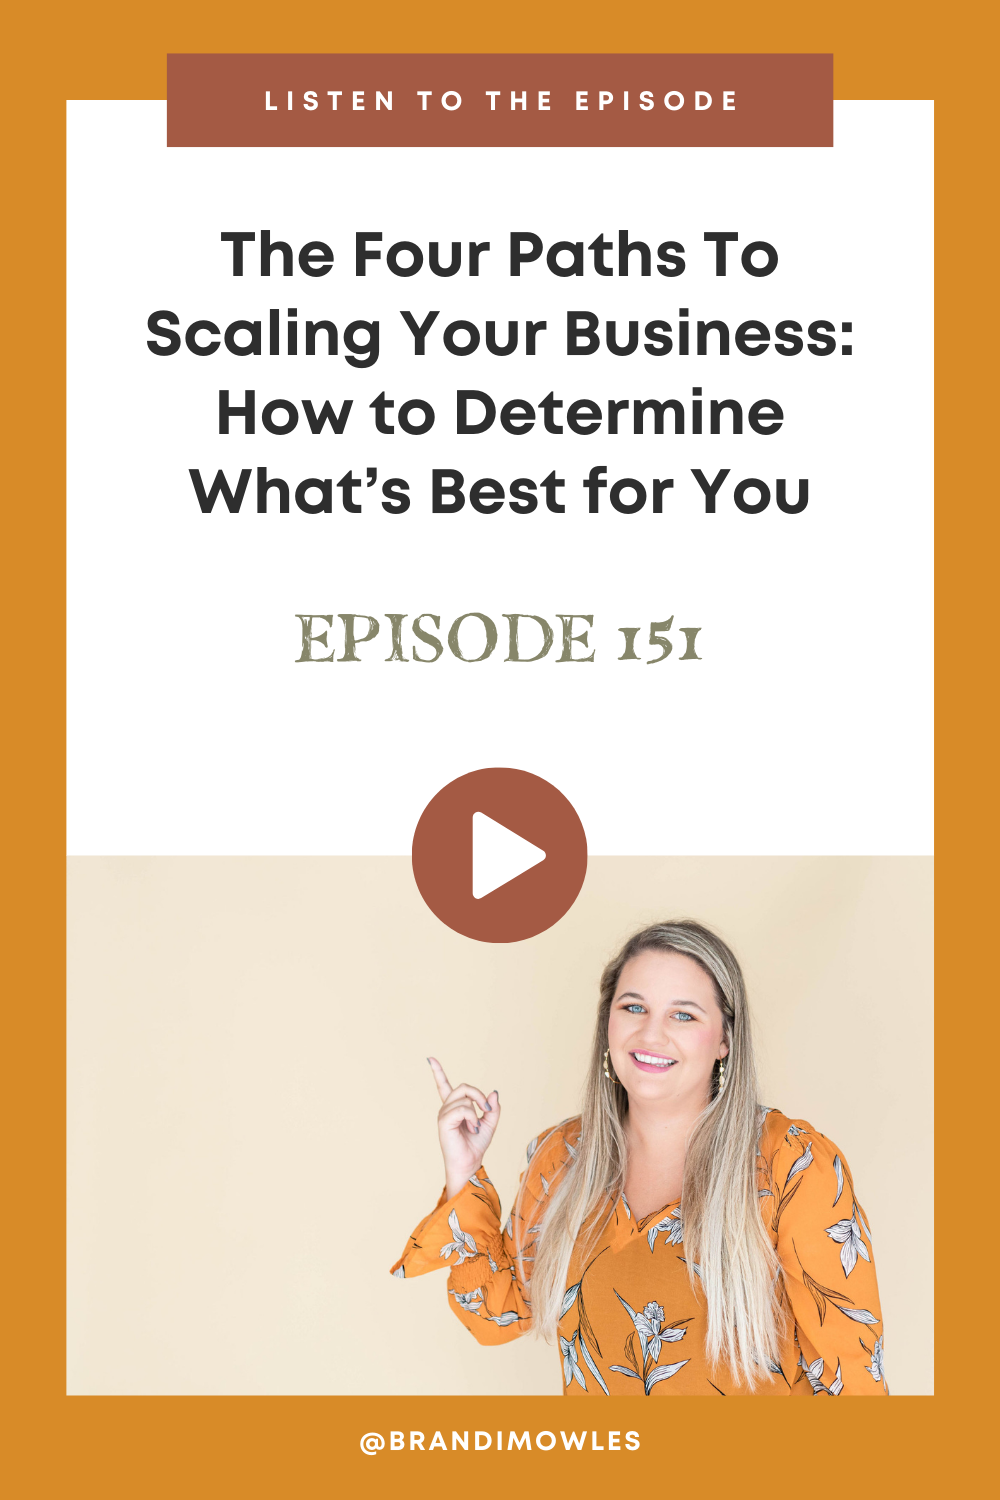 Brandi Mowles podcast episode feature about scaling